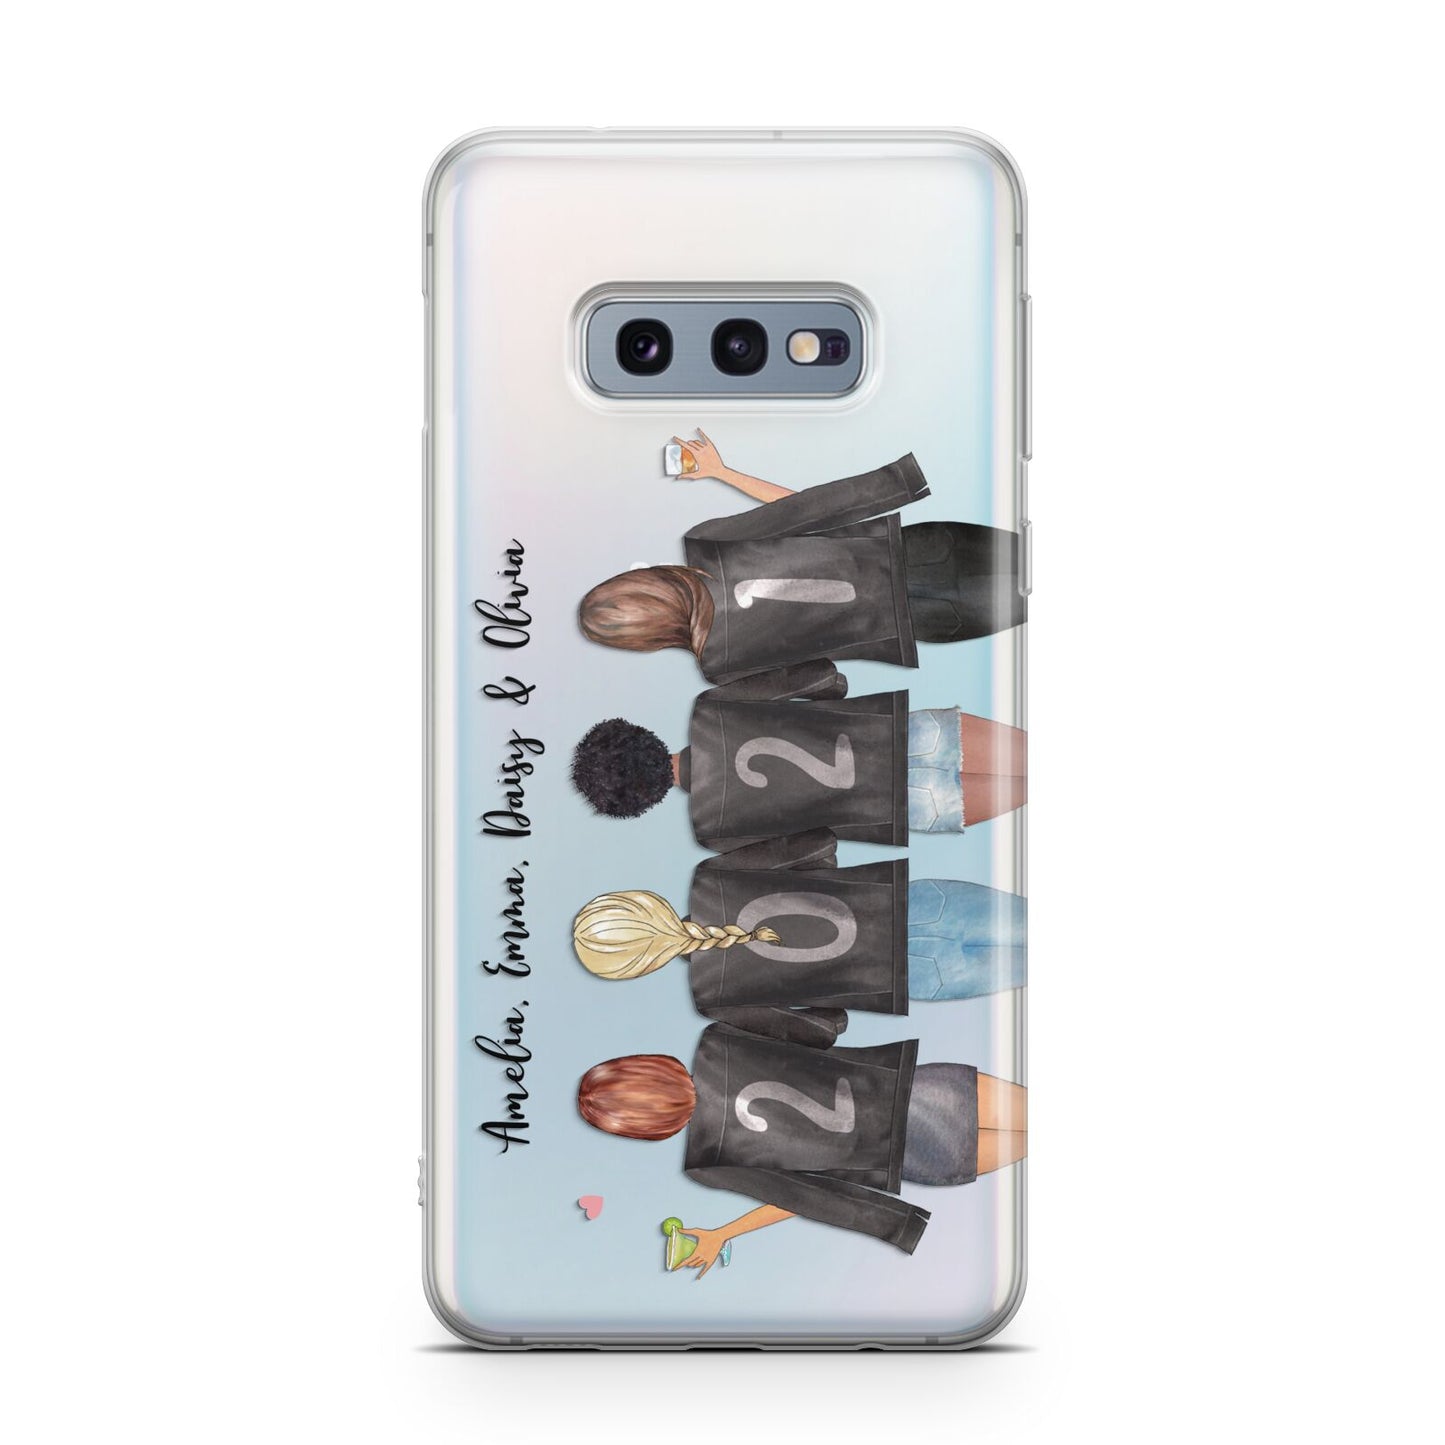 4 Best Friends with Names Samsung Galaxy S10E Case